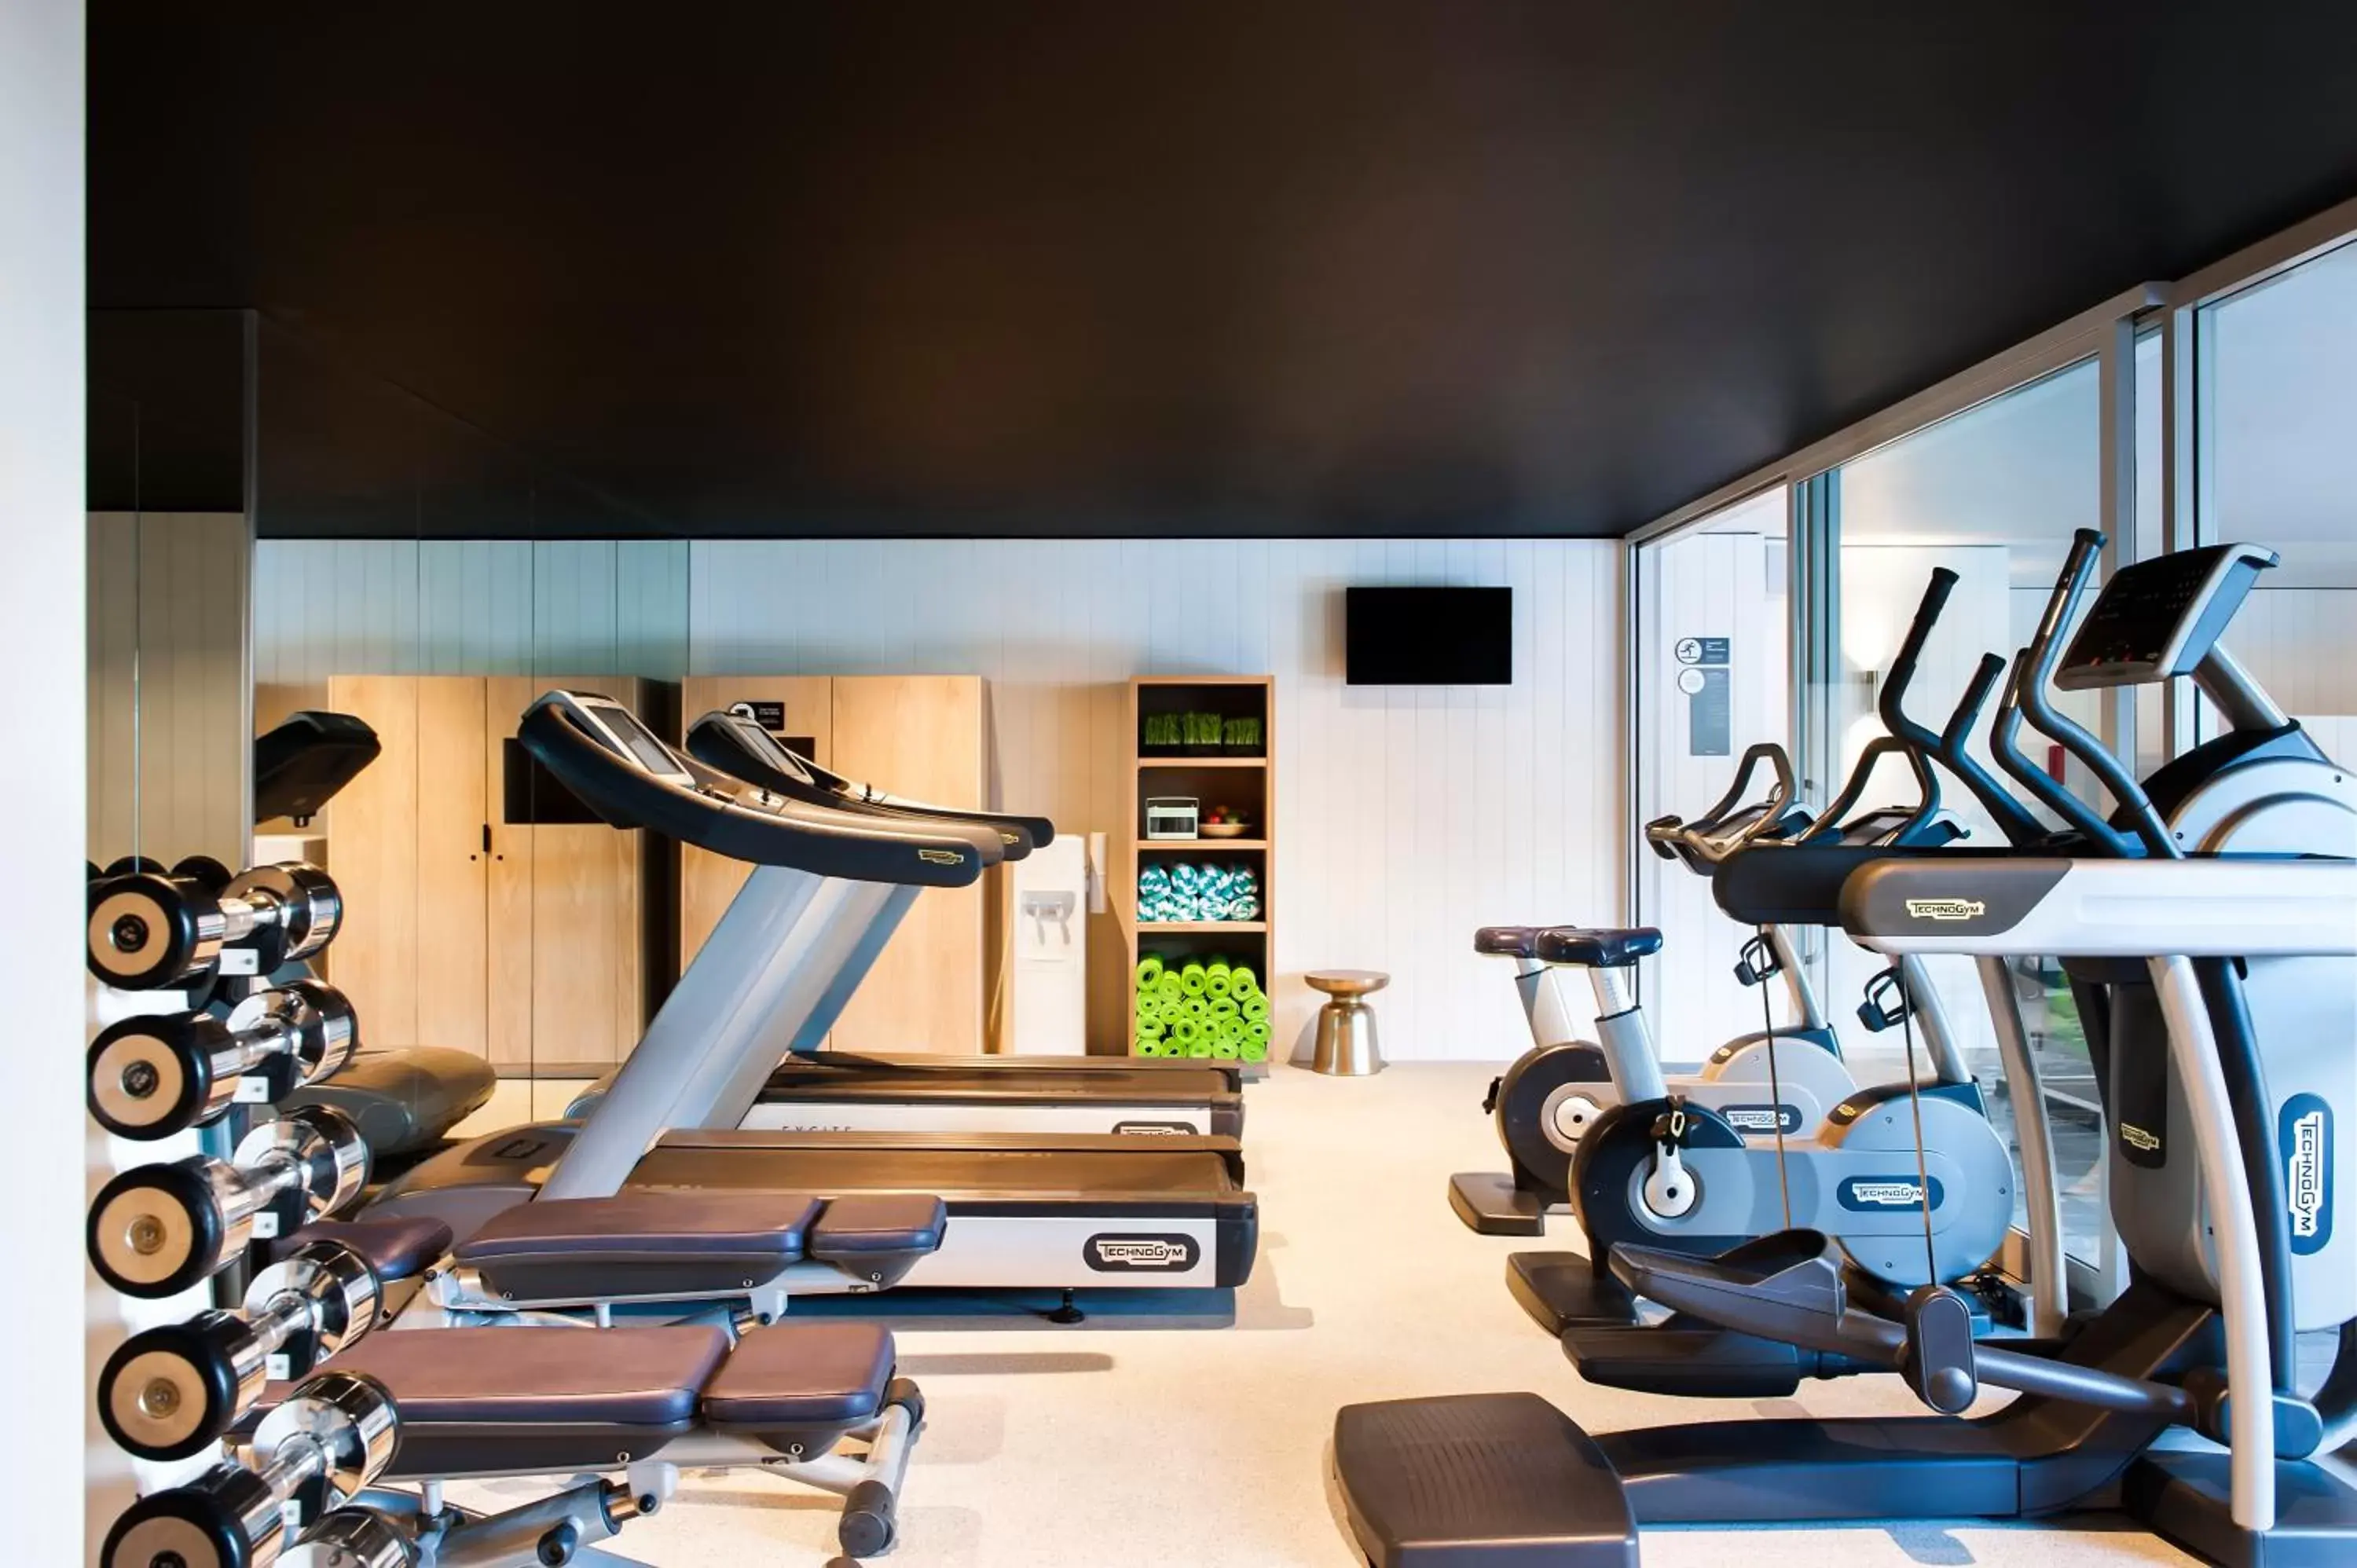 Fitness centre/facilities, Fitness Center/Facilities in Ovolo Woolloomooloo